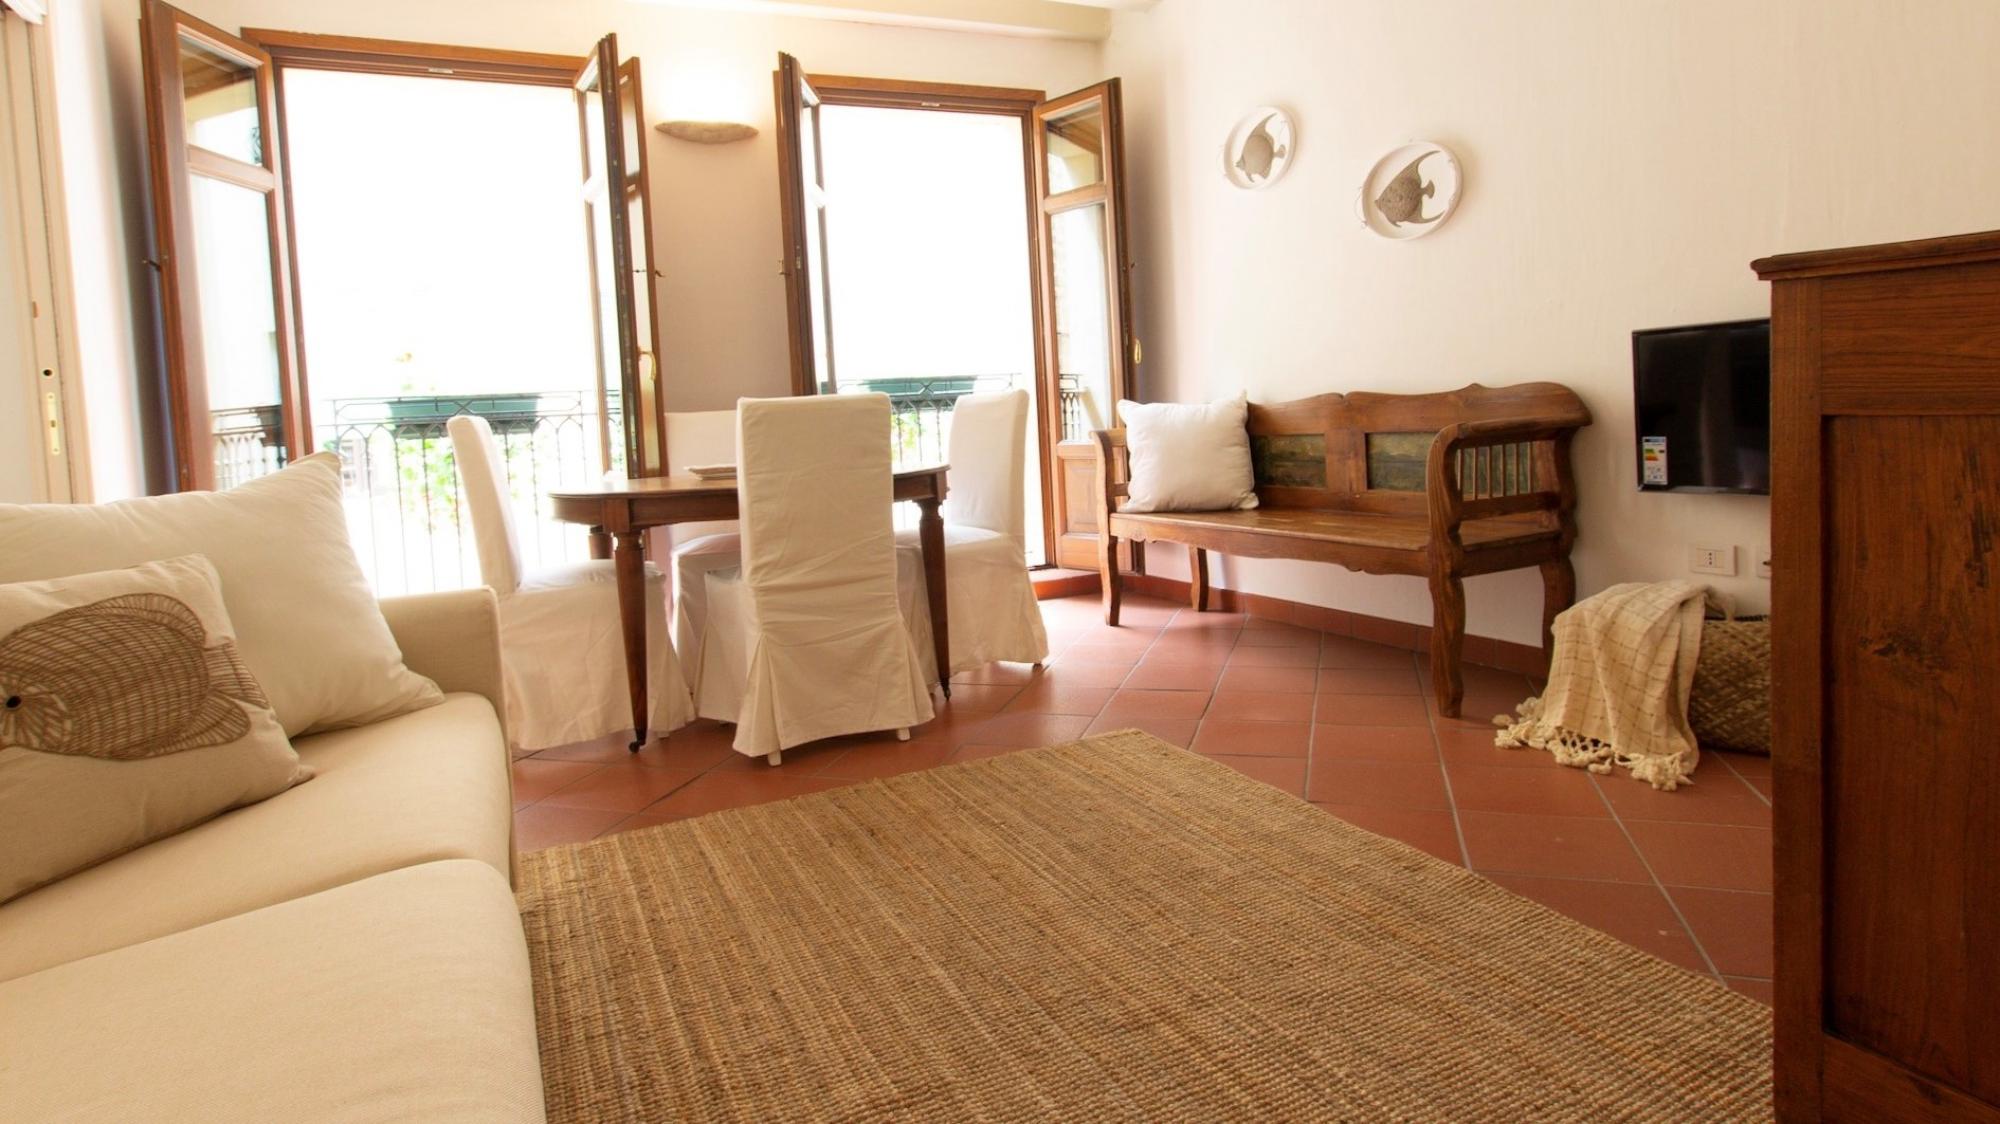 Property Image 1 - Welcomely - Roma 46 B